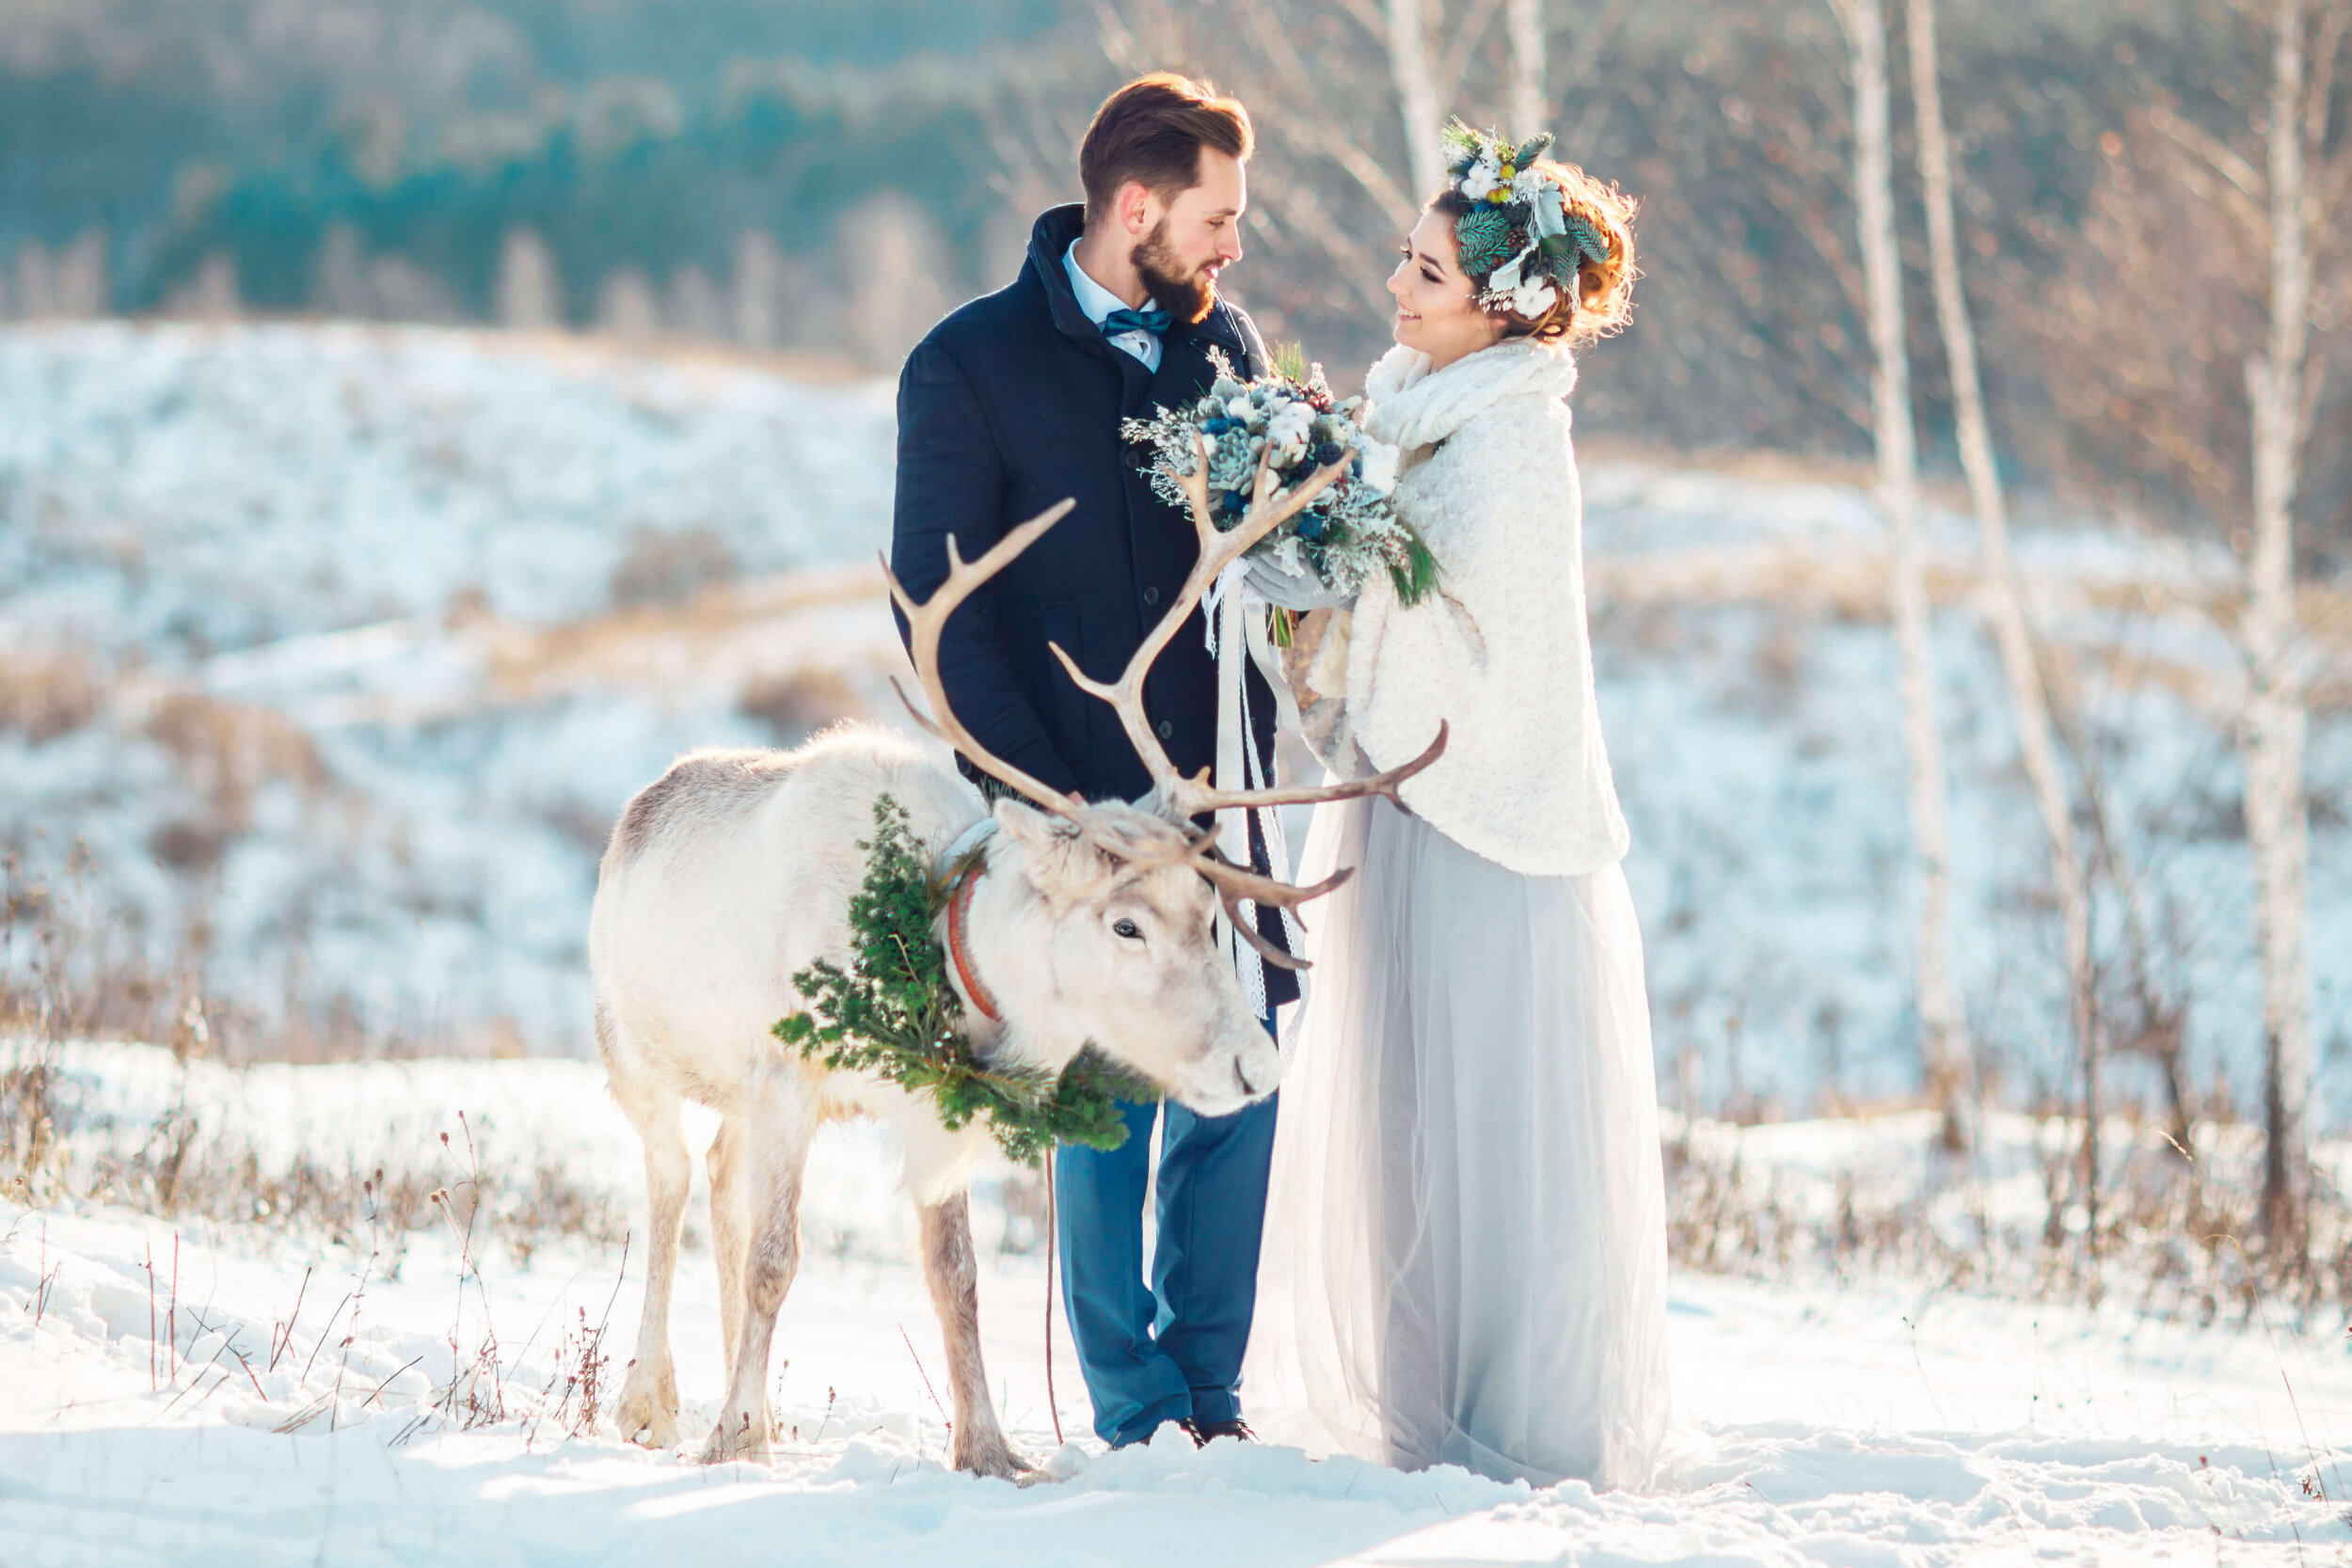 Winter Wedding Dresses Perfect for a Snowy Day  Winter wedding dress,  Winter bride, Amazing wedding dress